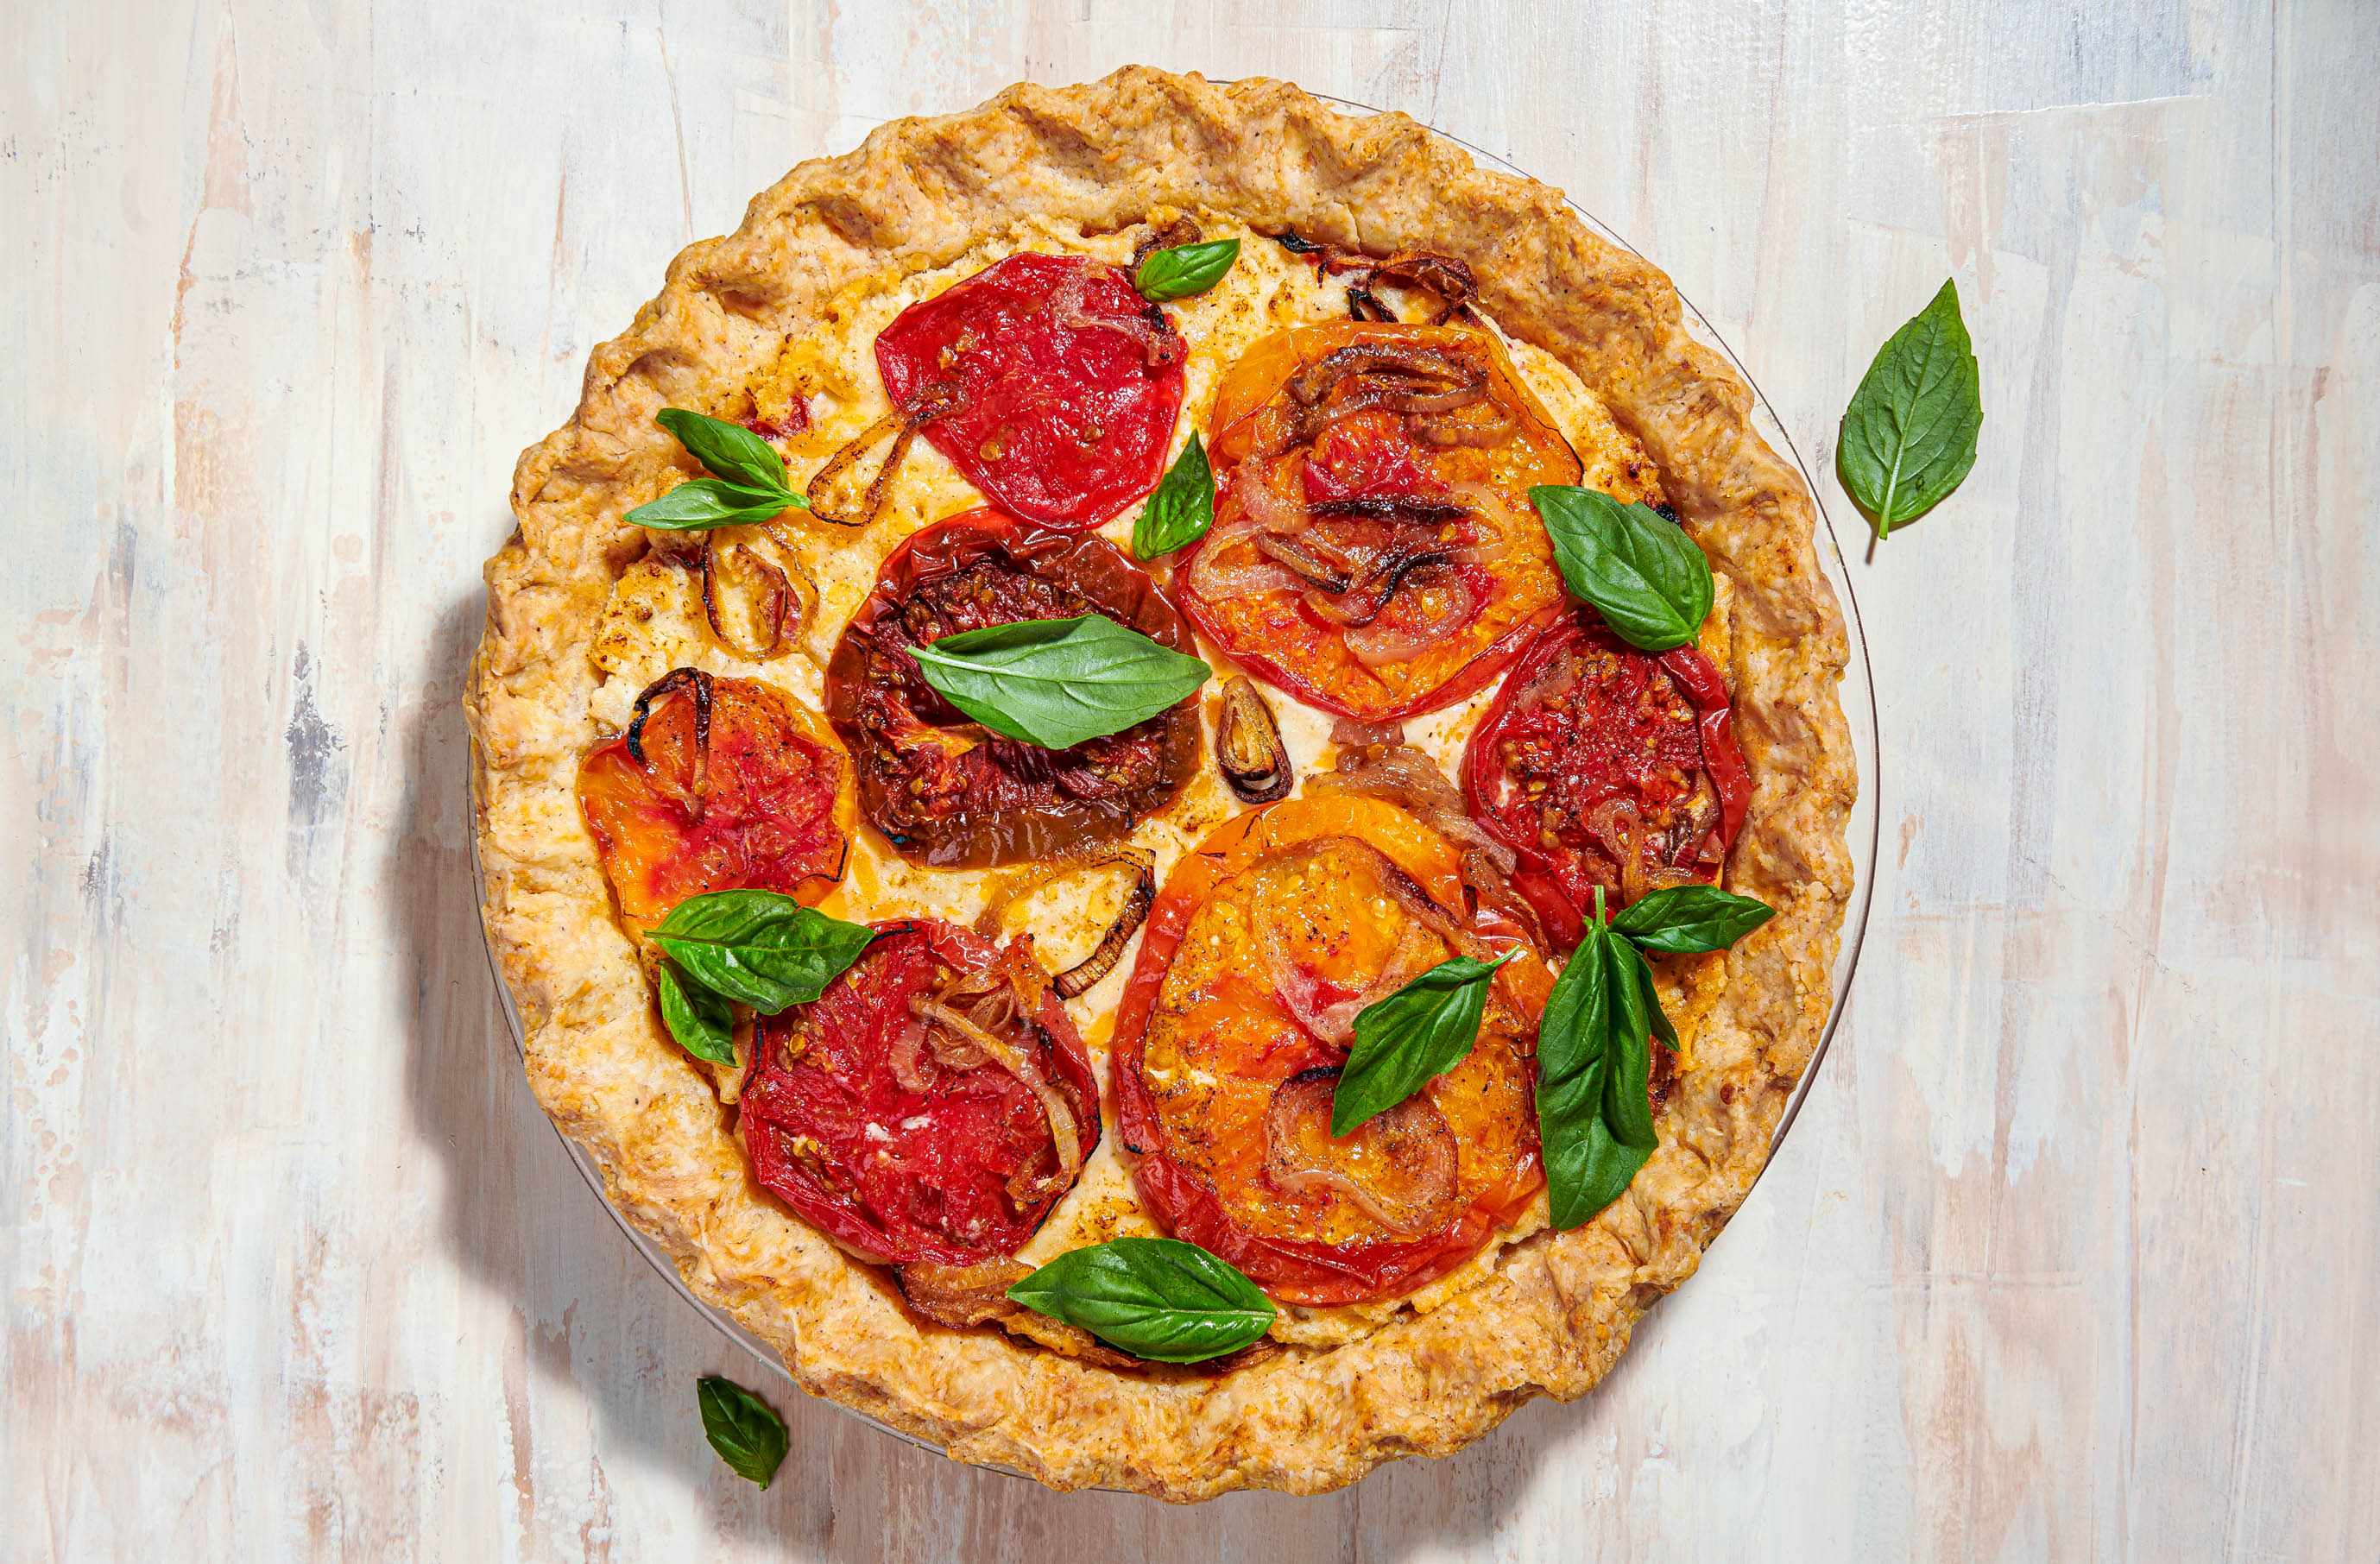 Roasted Tomato Pie With Cheddar-Parmesan Crust